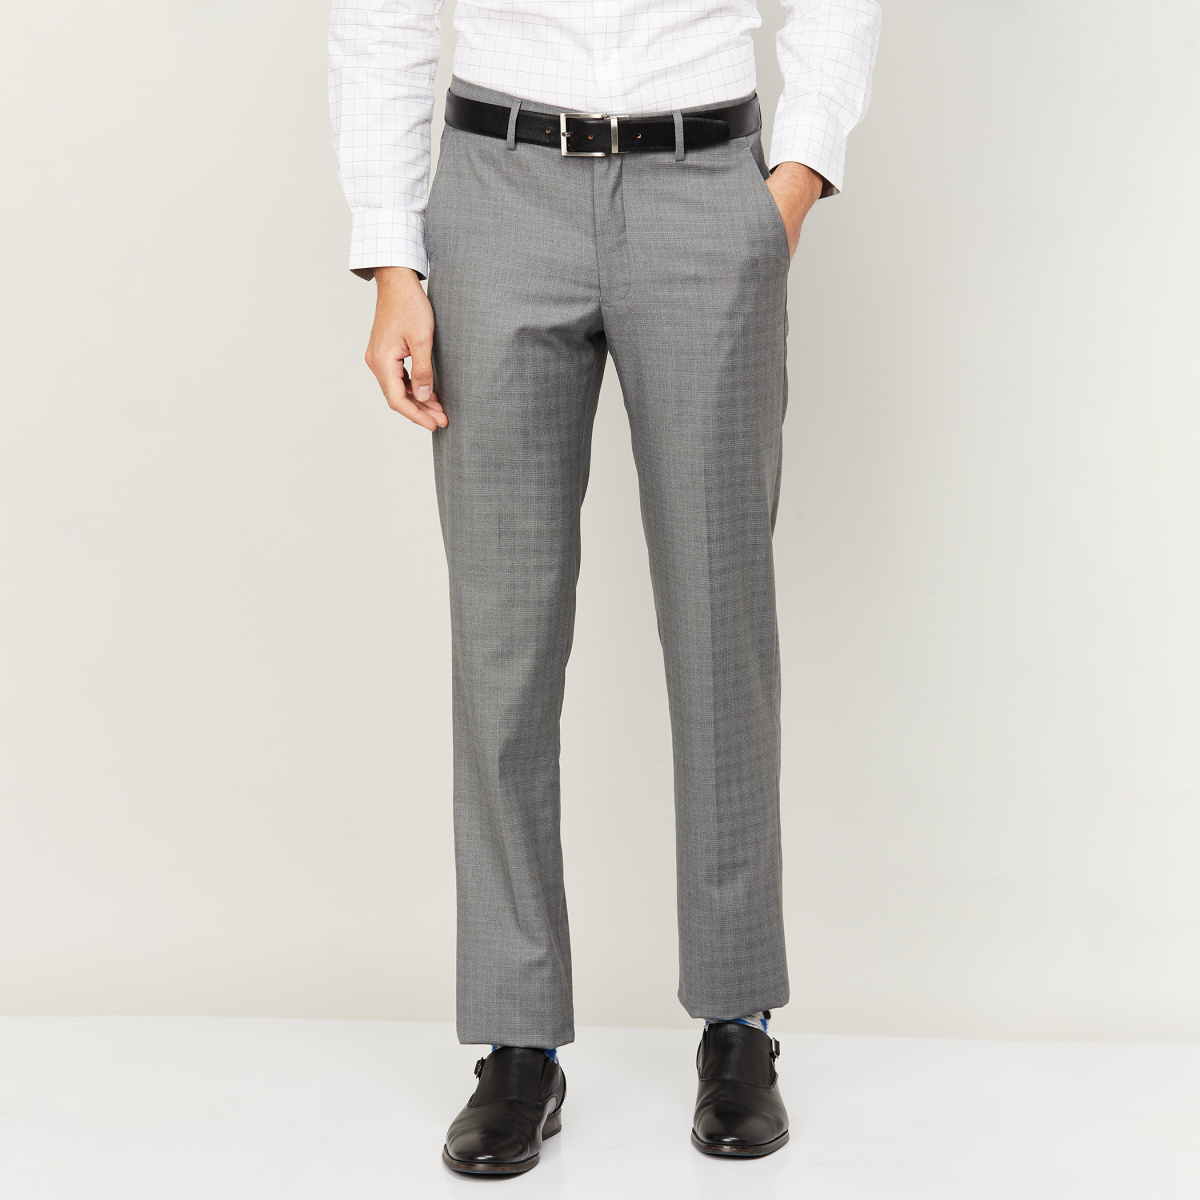 Arrow Formal Trousers  Buy Arrow Men Grey Tapered Fit Patterned Mid Rise Formal  Trousers Online  Nykaa Fashion